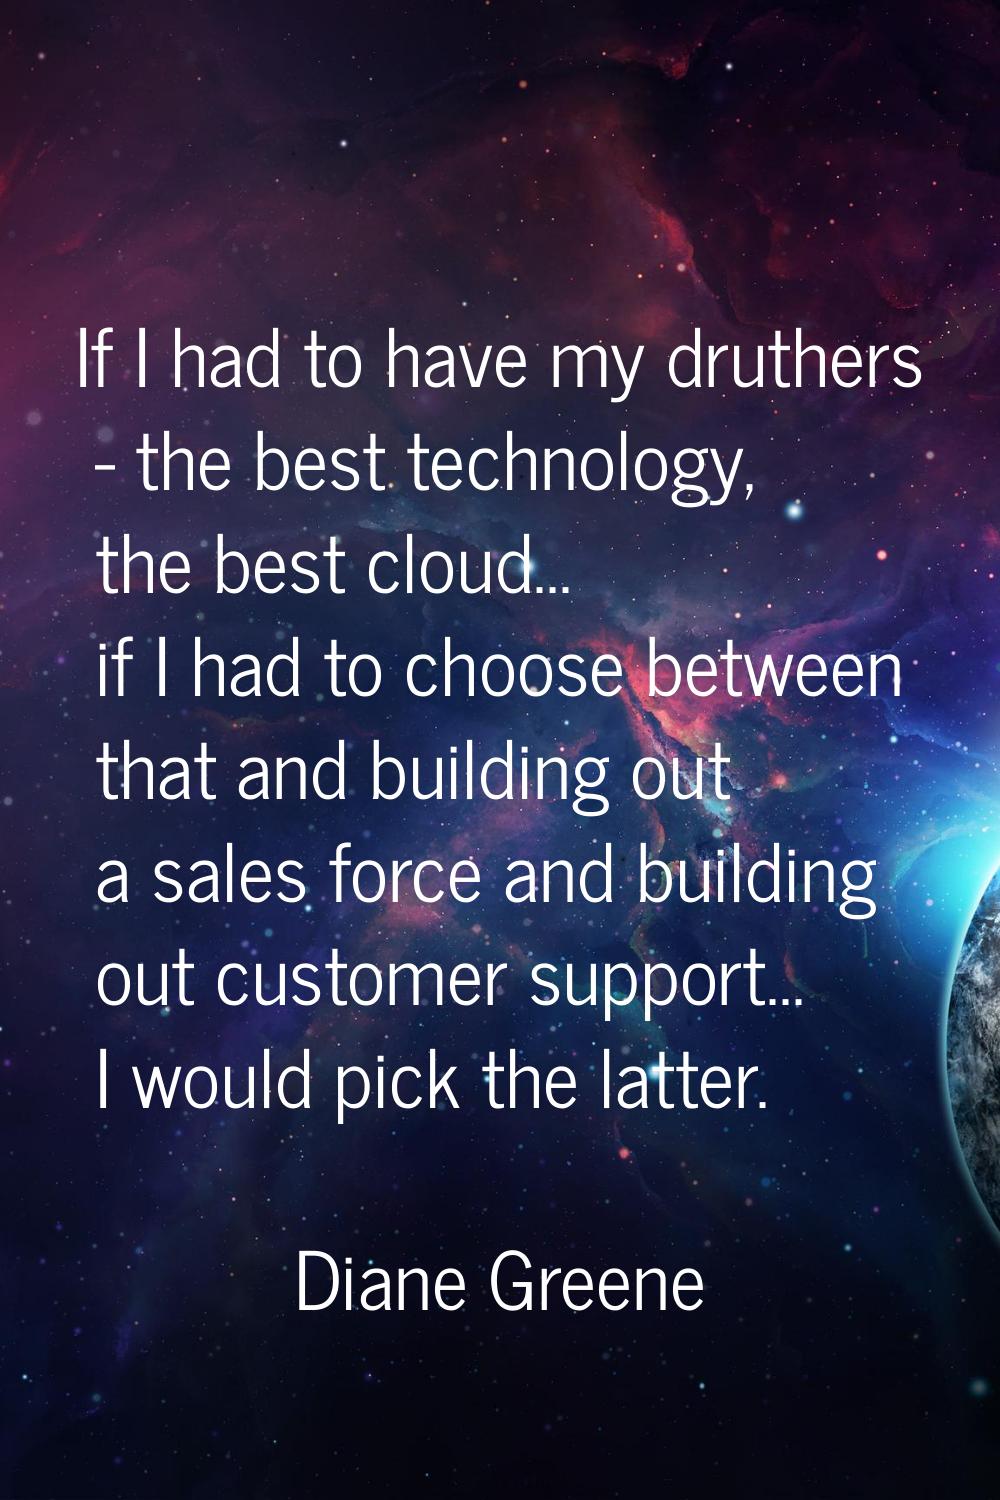 If I had to have my druthers - the best technology, the best cloud... if I had to choose between th